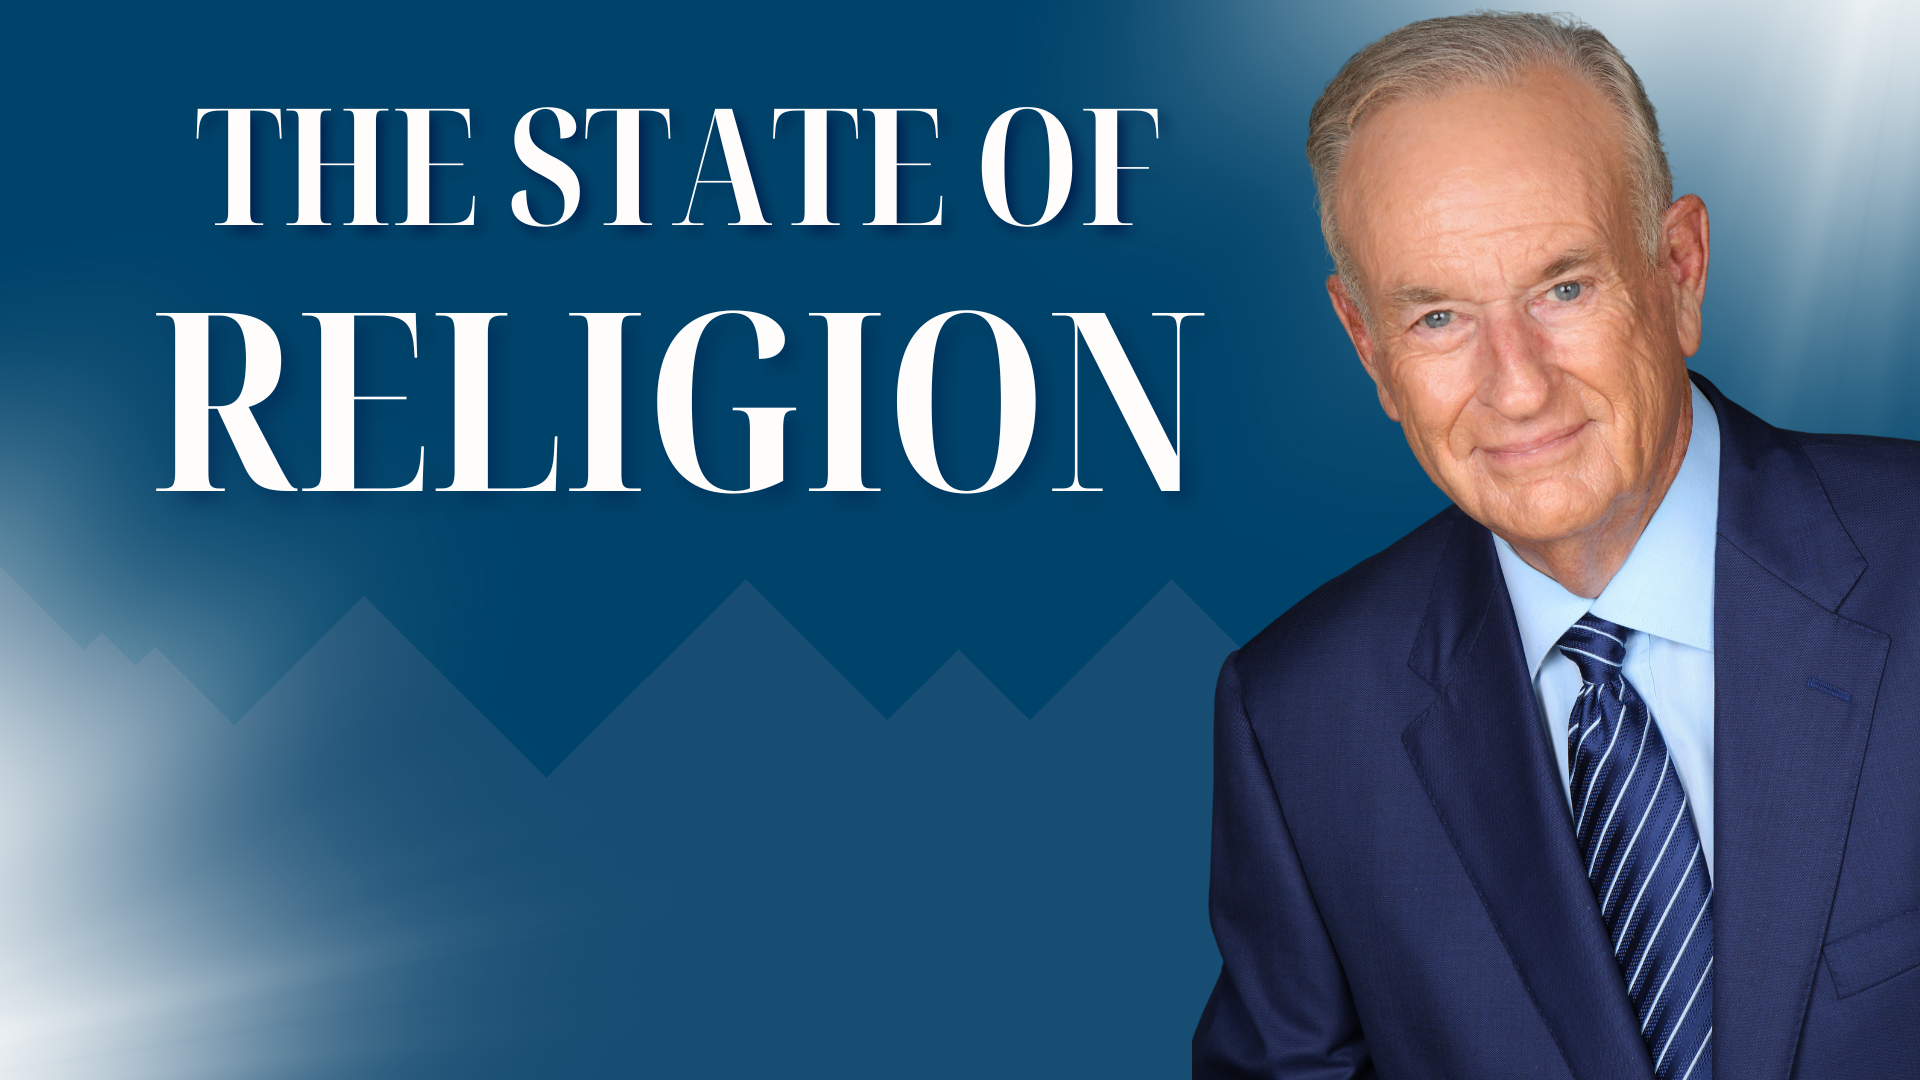 The State of Religion